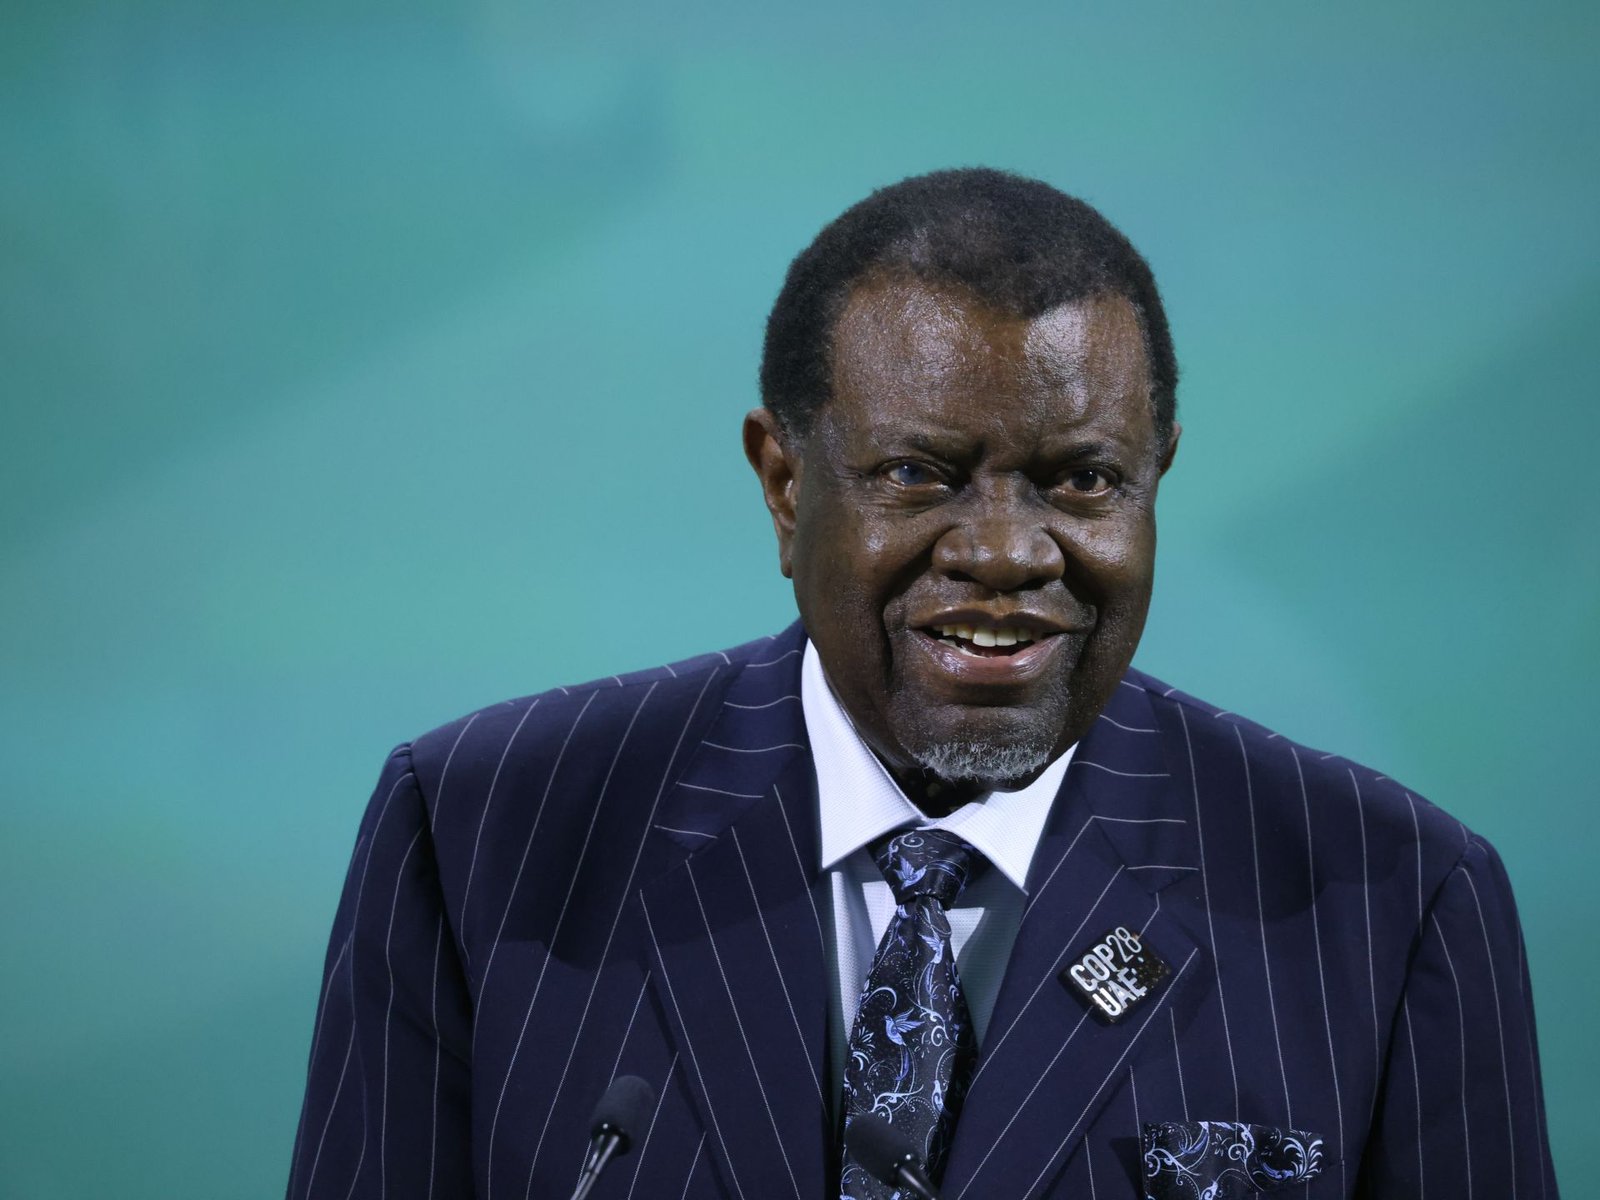 Namibias president to undergo treatment after cancerous cells found | Health News